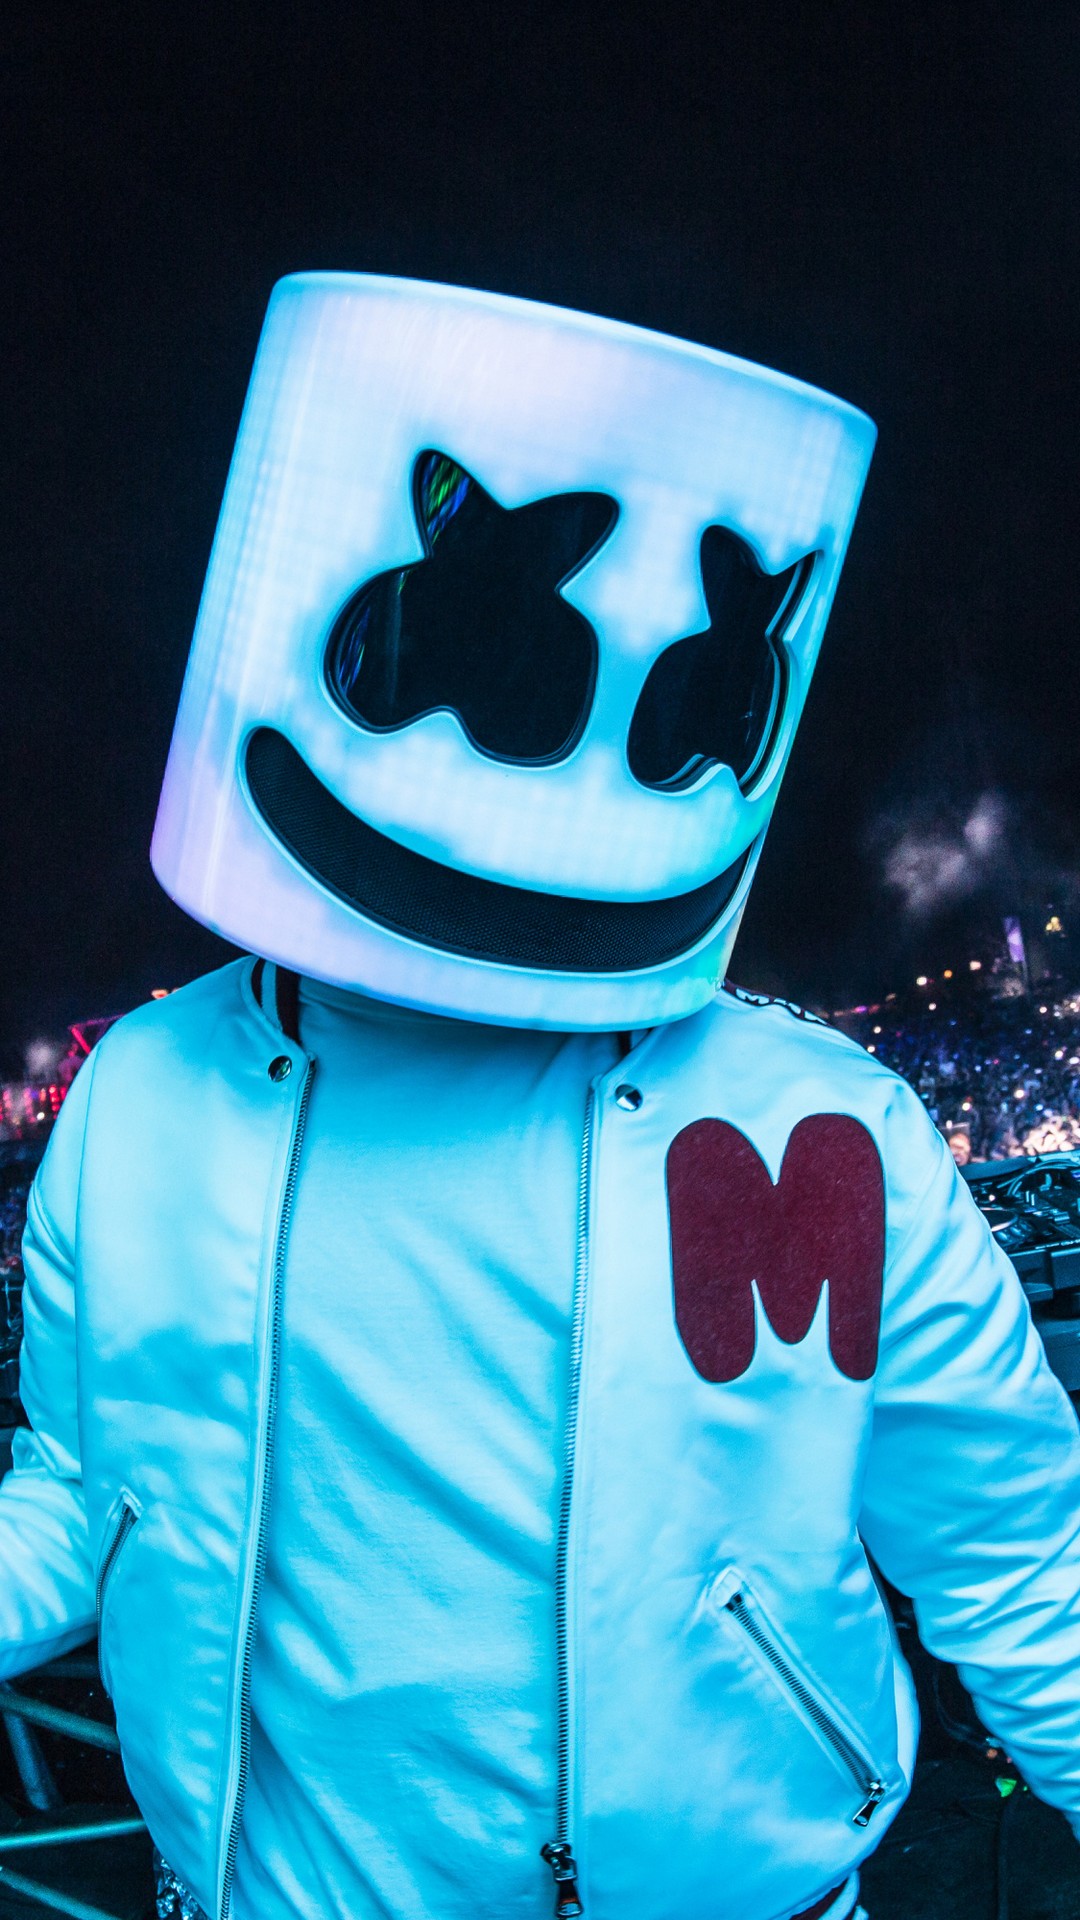 Wallpapers iPhone Marshmello With high-resolution 1080X1920 pixel. You can use this wallpaper for your iPhone 5, 6, 7, 8, X, XS, XR backgrounds, Mobile Screensaver, or iPad Lock Screen